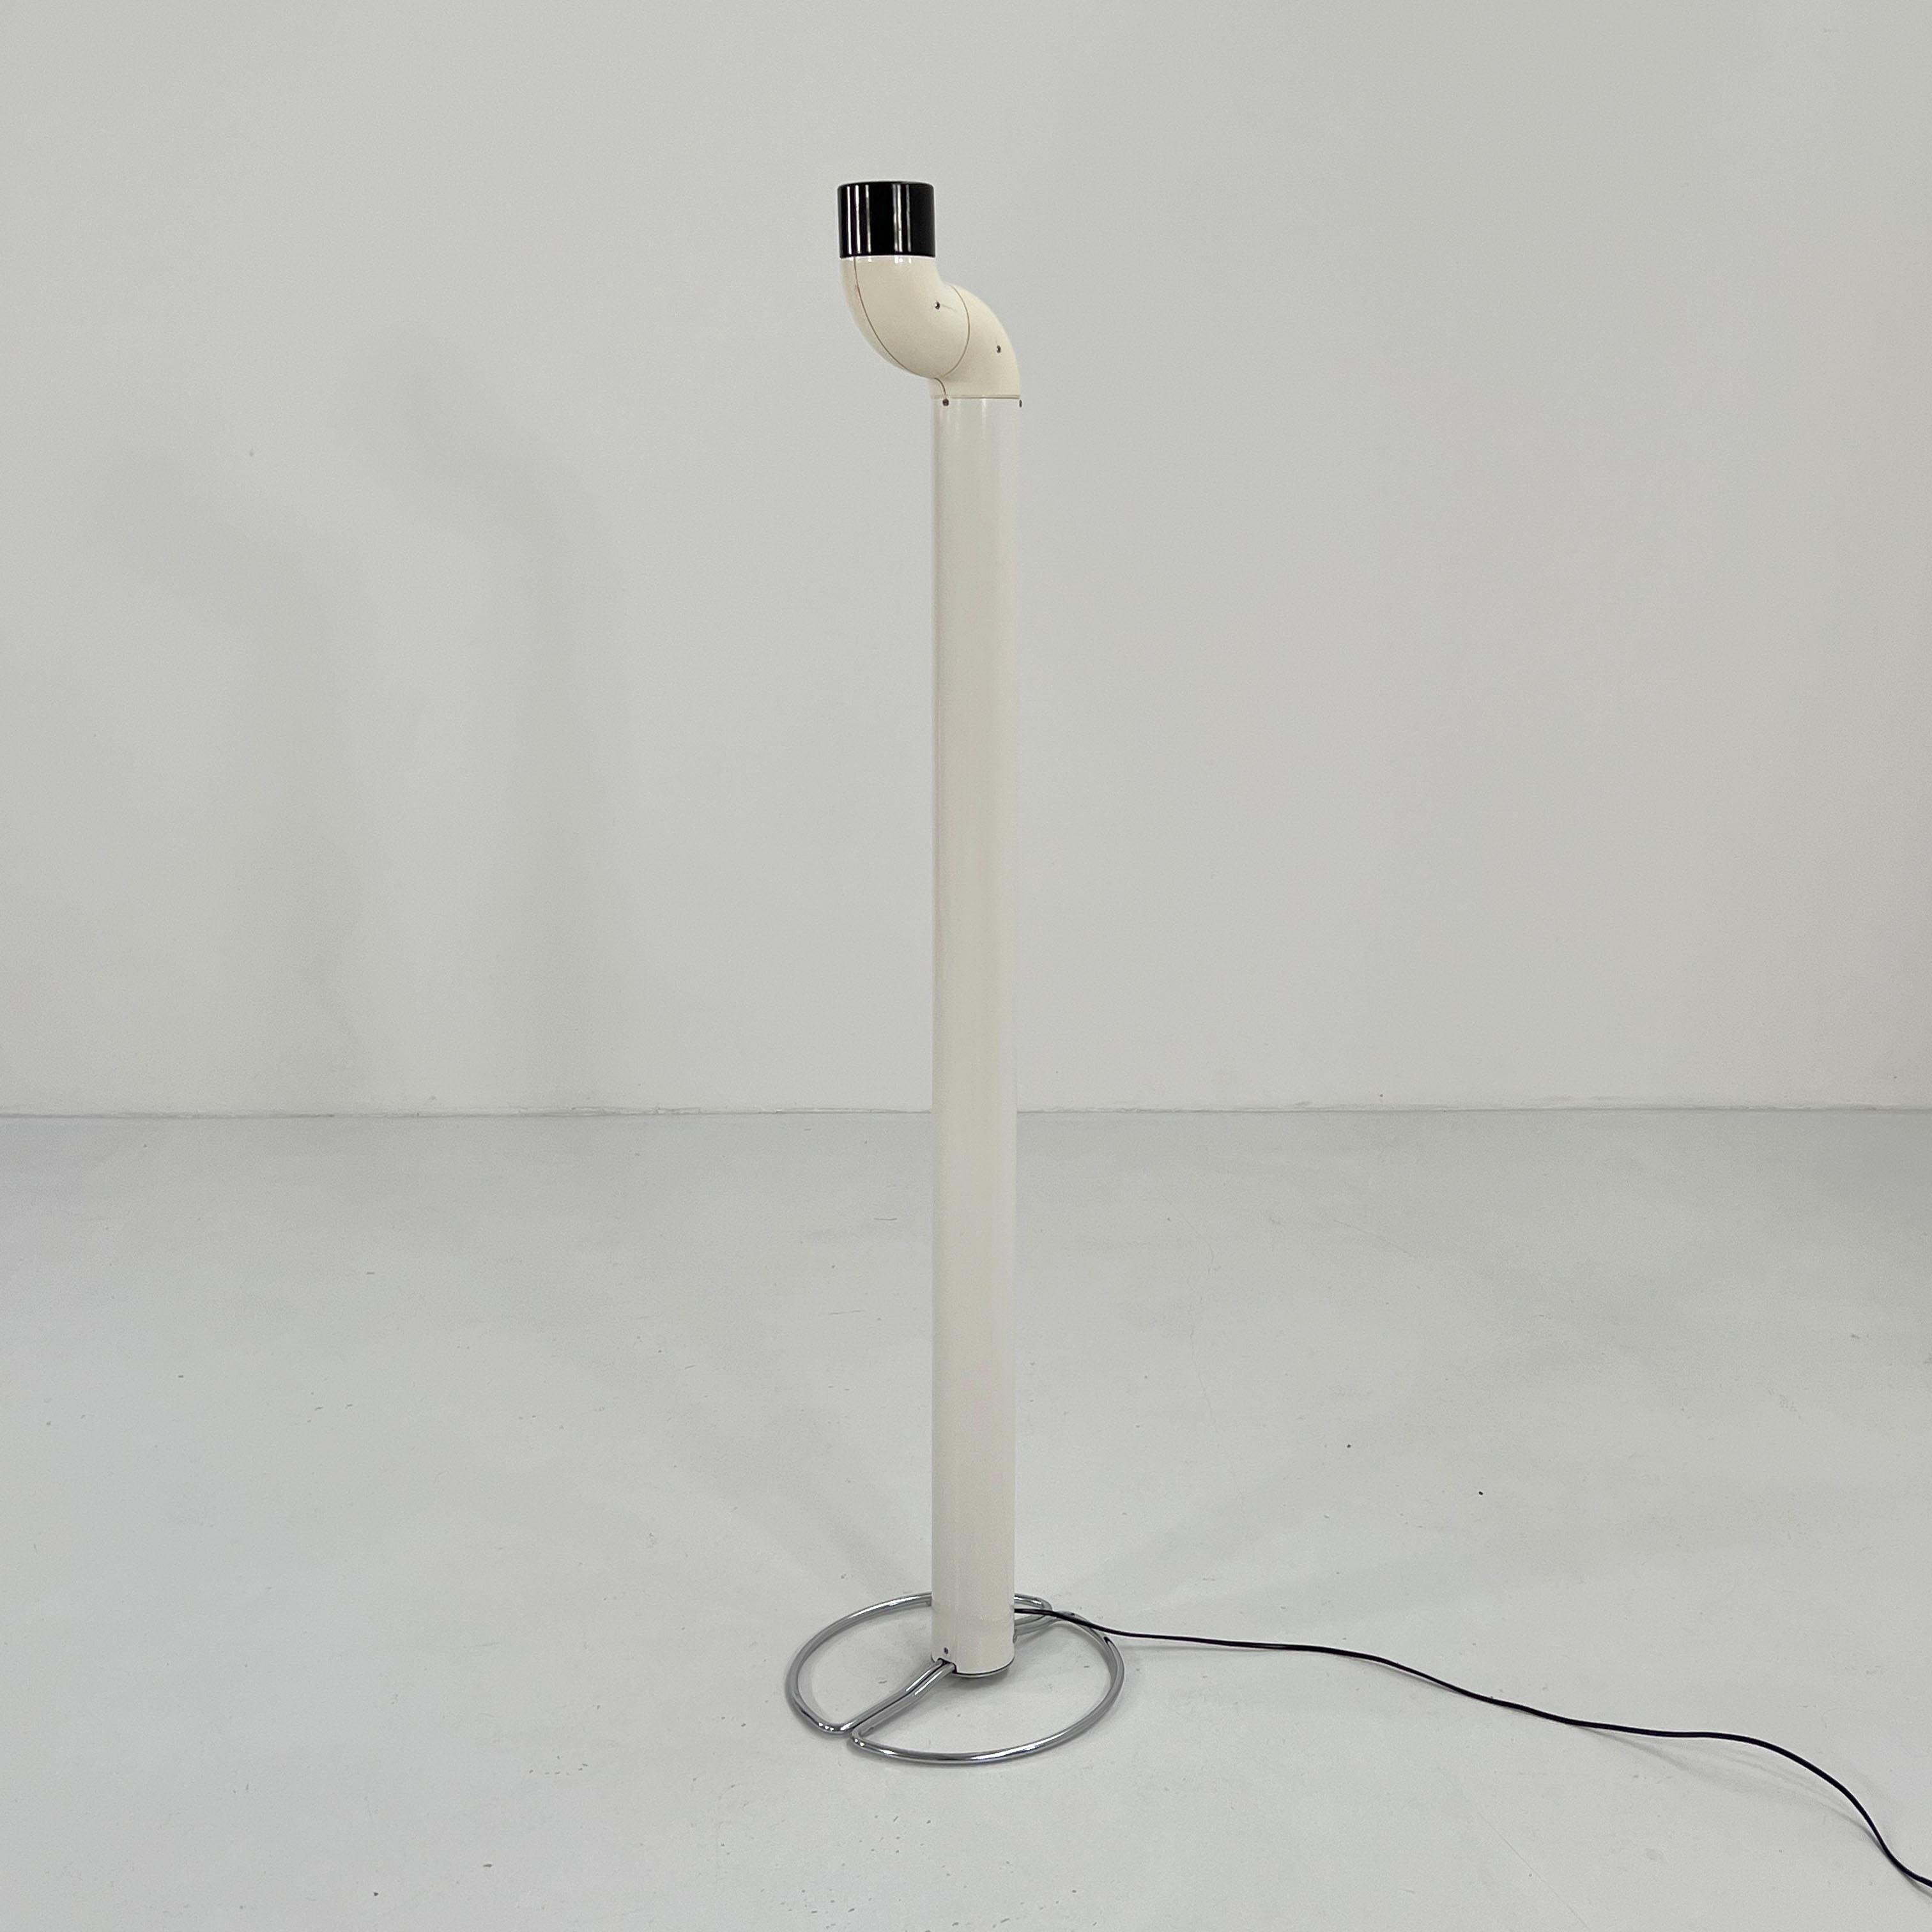 Flamingo Floor Lamp by Kwok Hoi Chan for Concord, 1960s For Sale 5